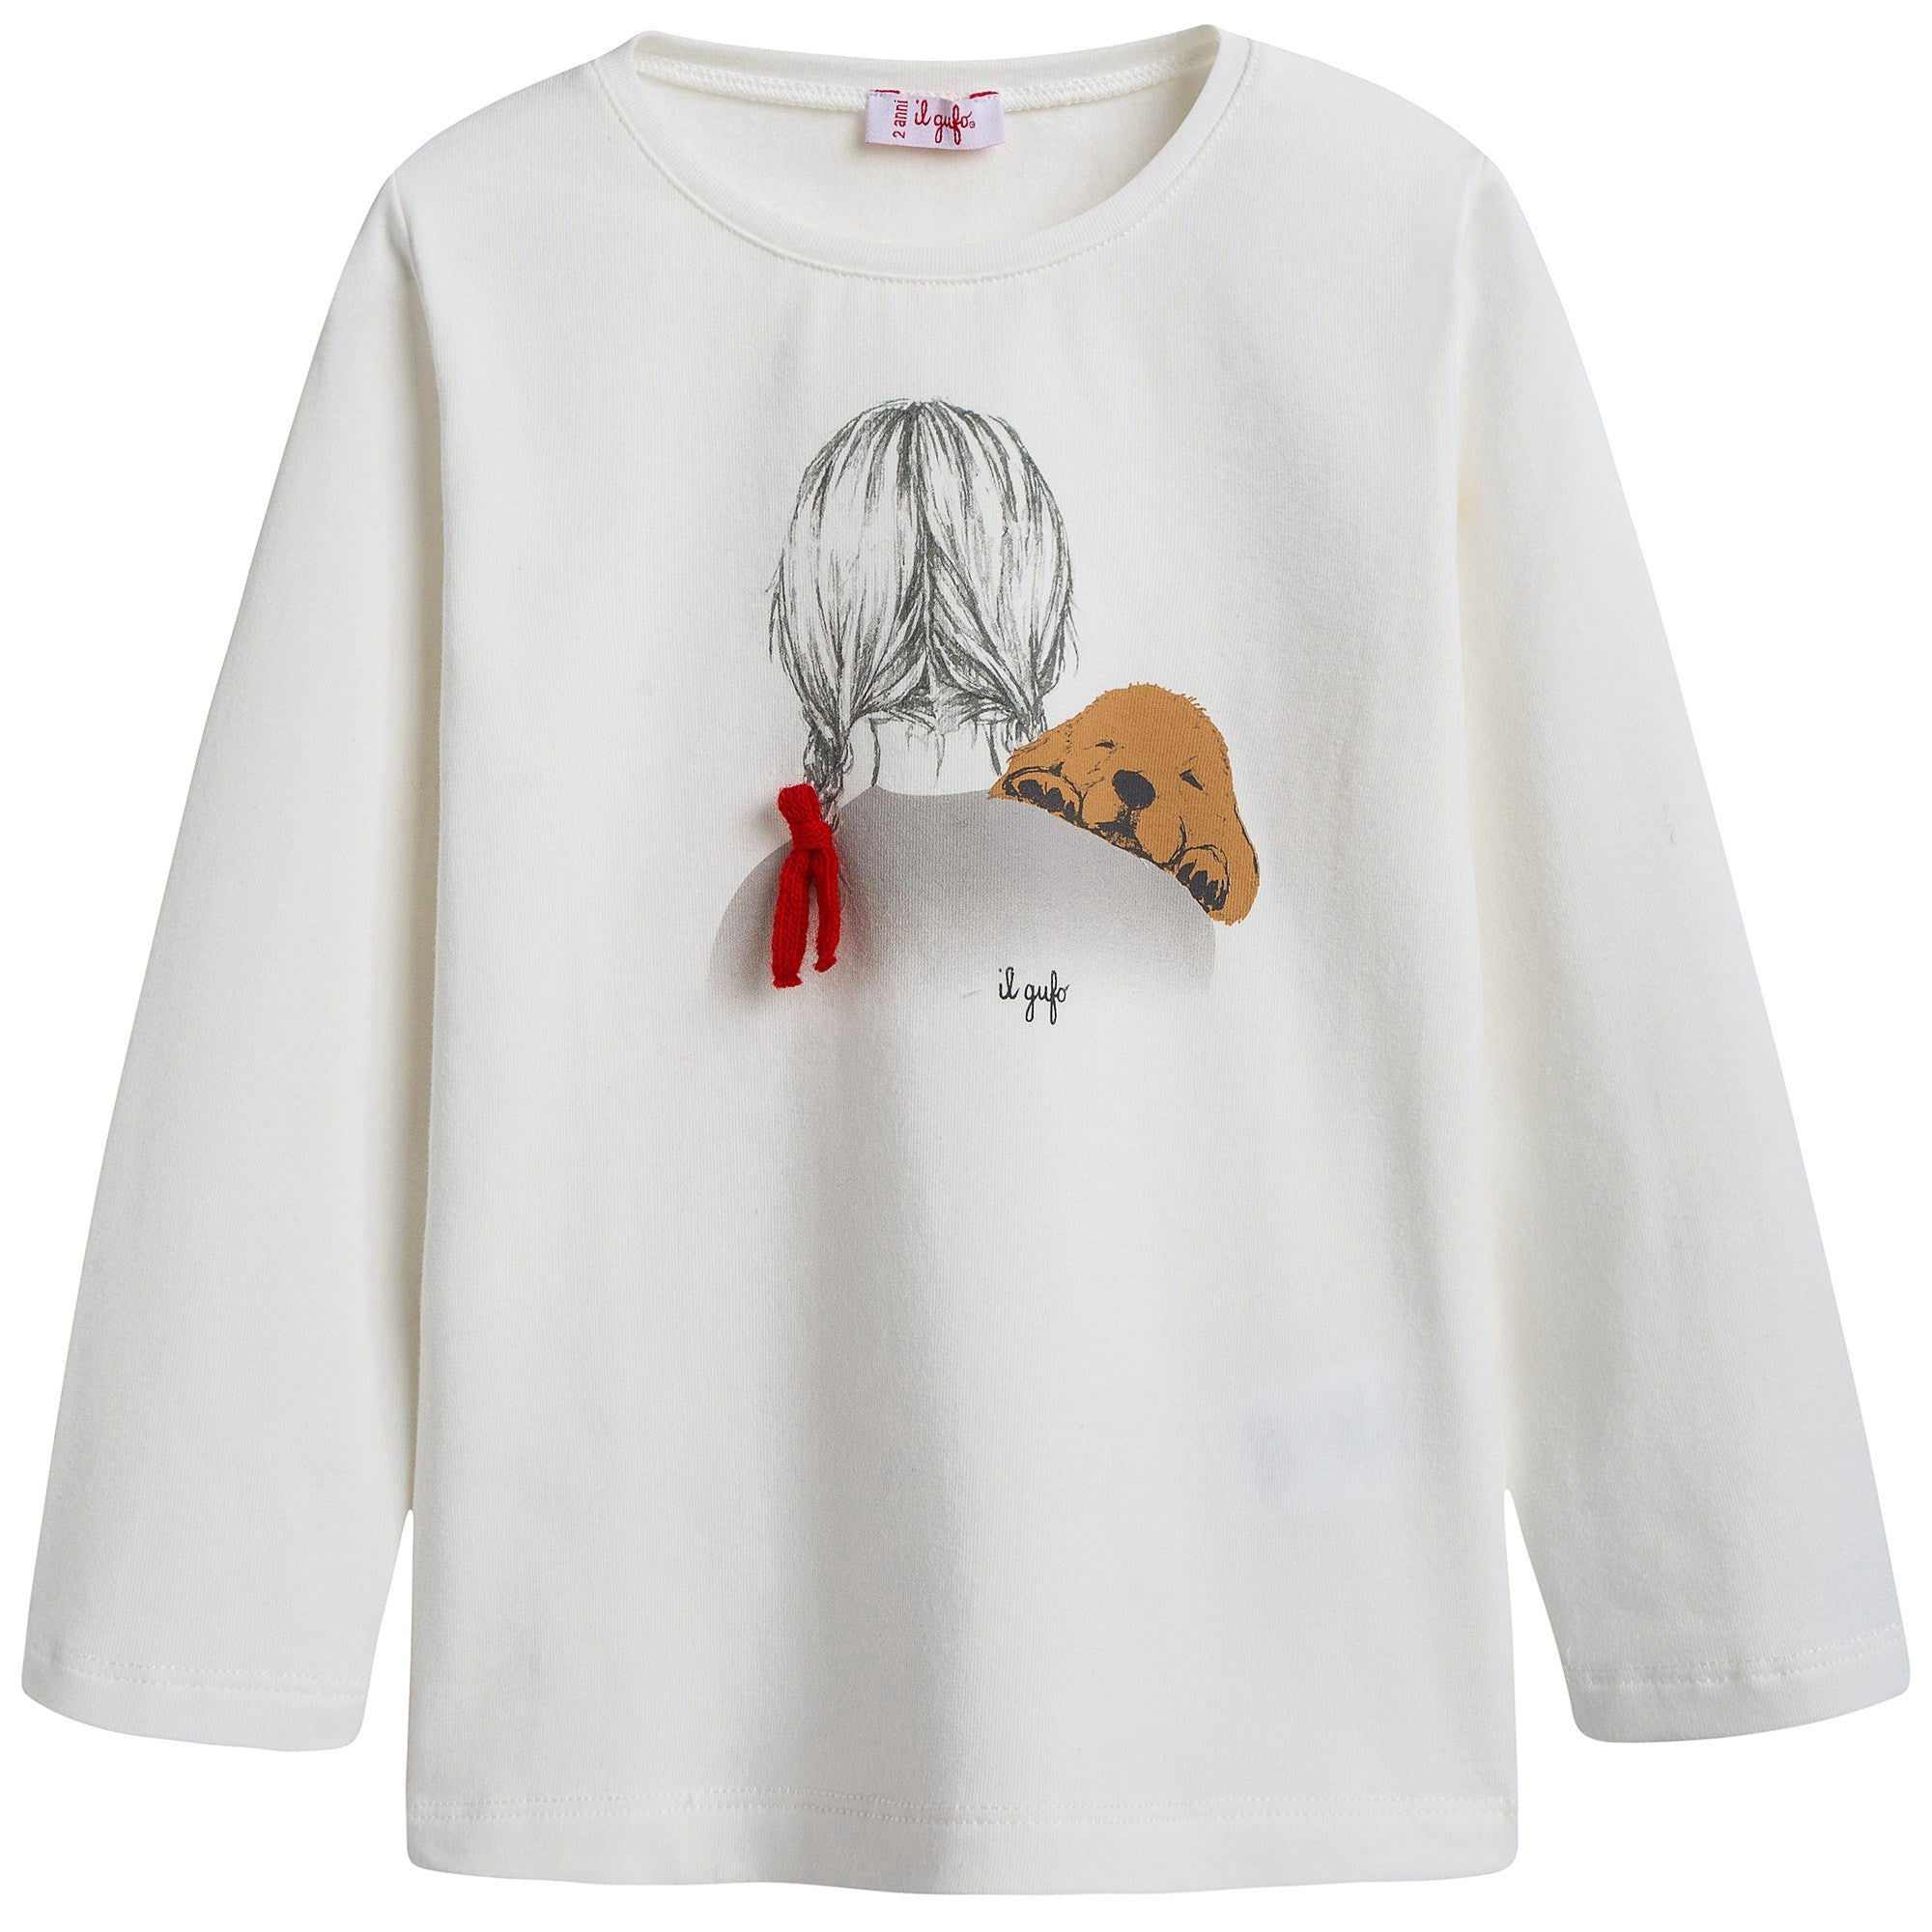 Girls Ivory Cotton T-shirt with Red Bow